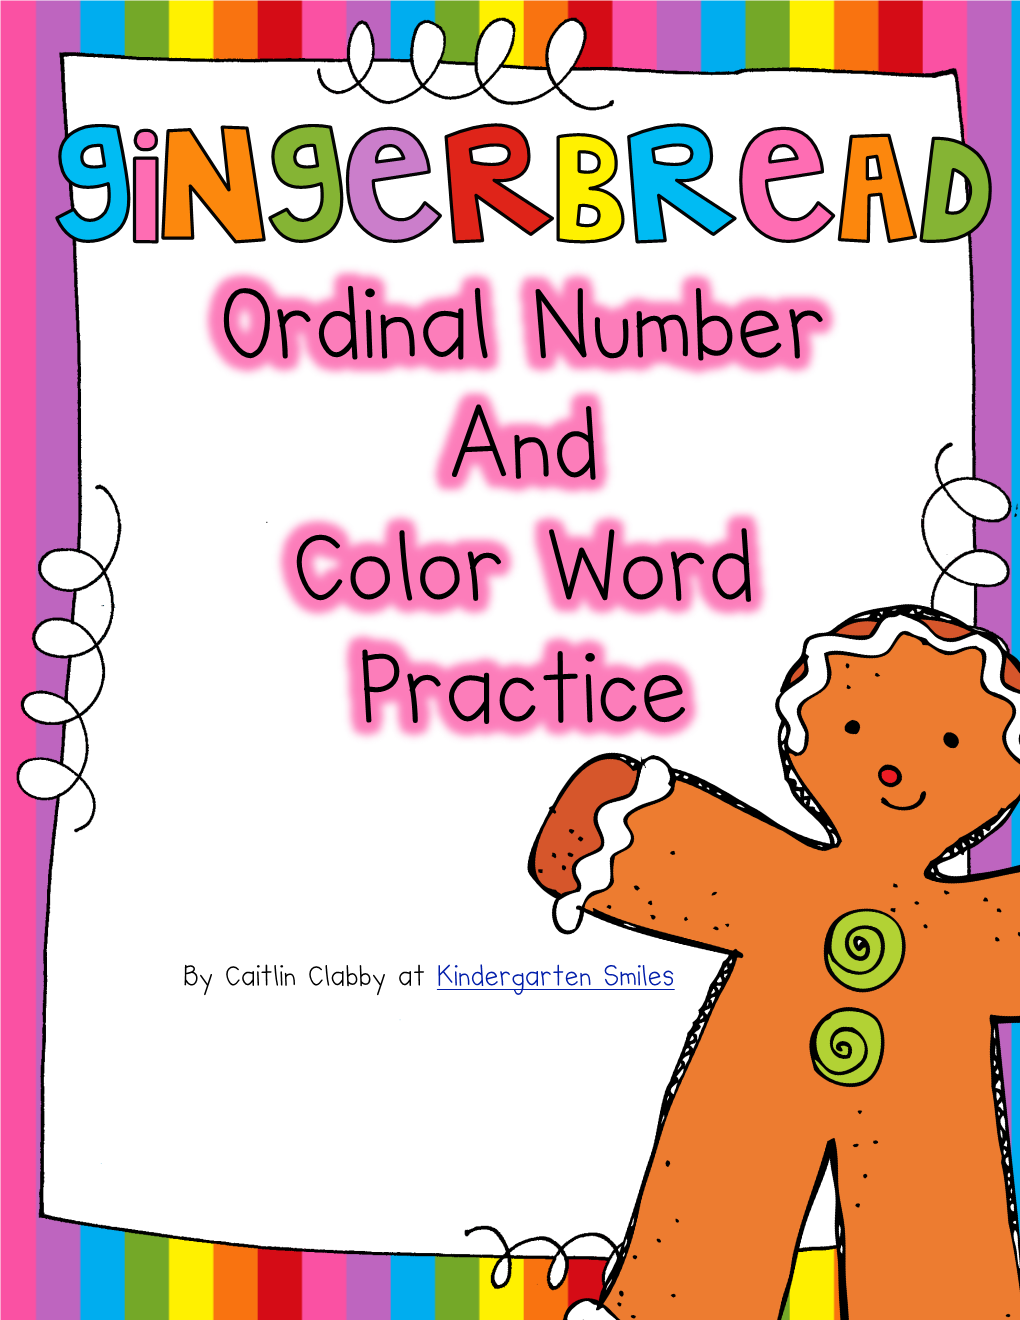 Ordinal Number and Color Word Practice